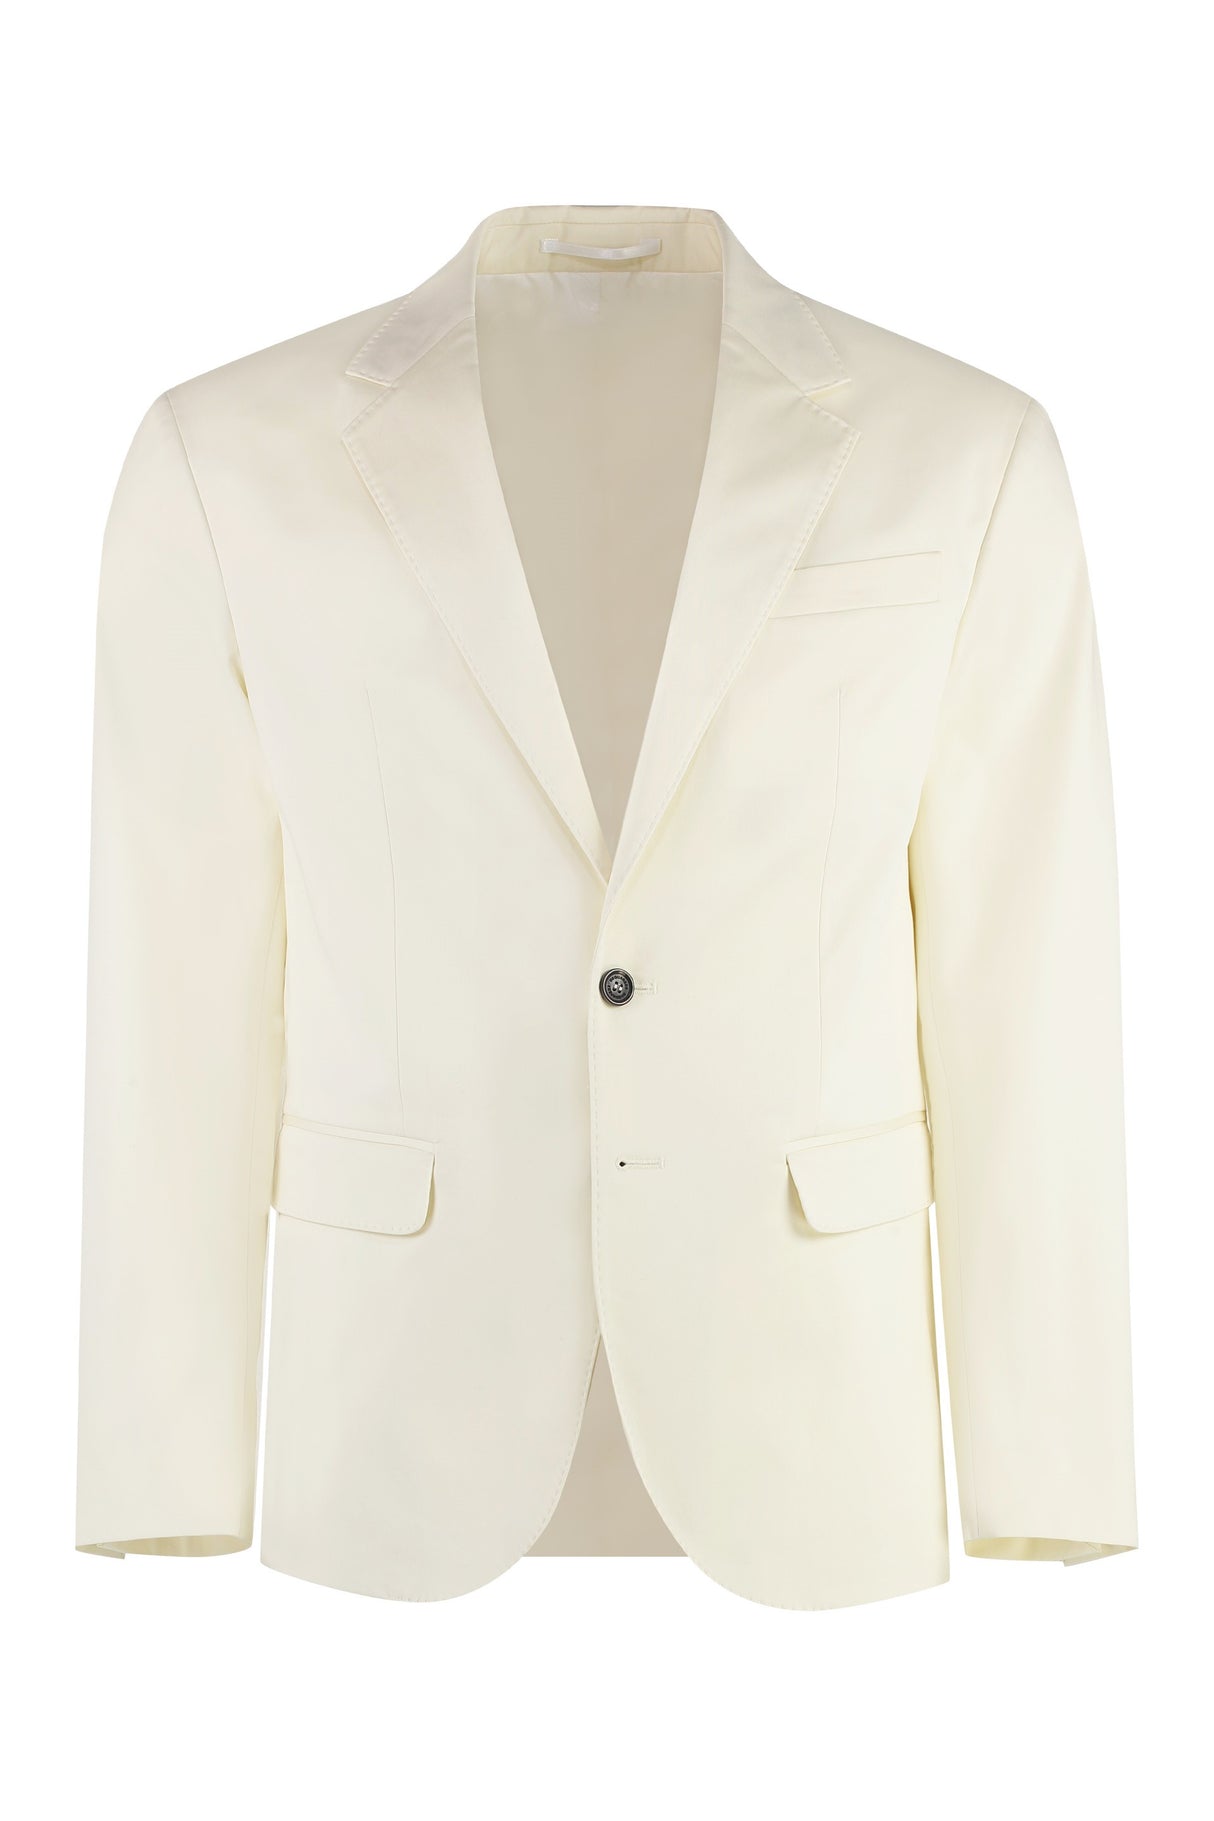 DSQUARED2 Classic Two-Piece Cotton Suit for Men - SS24 Collection